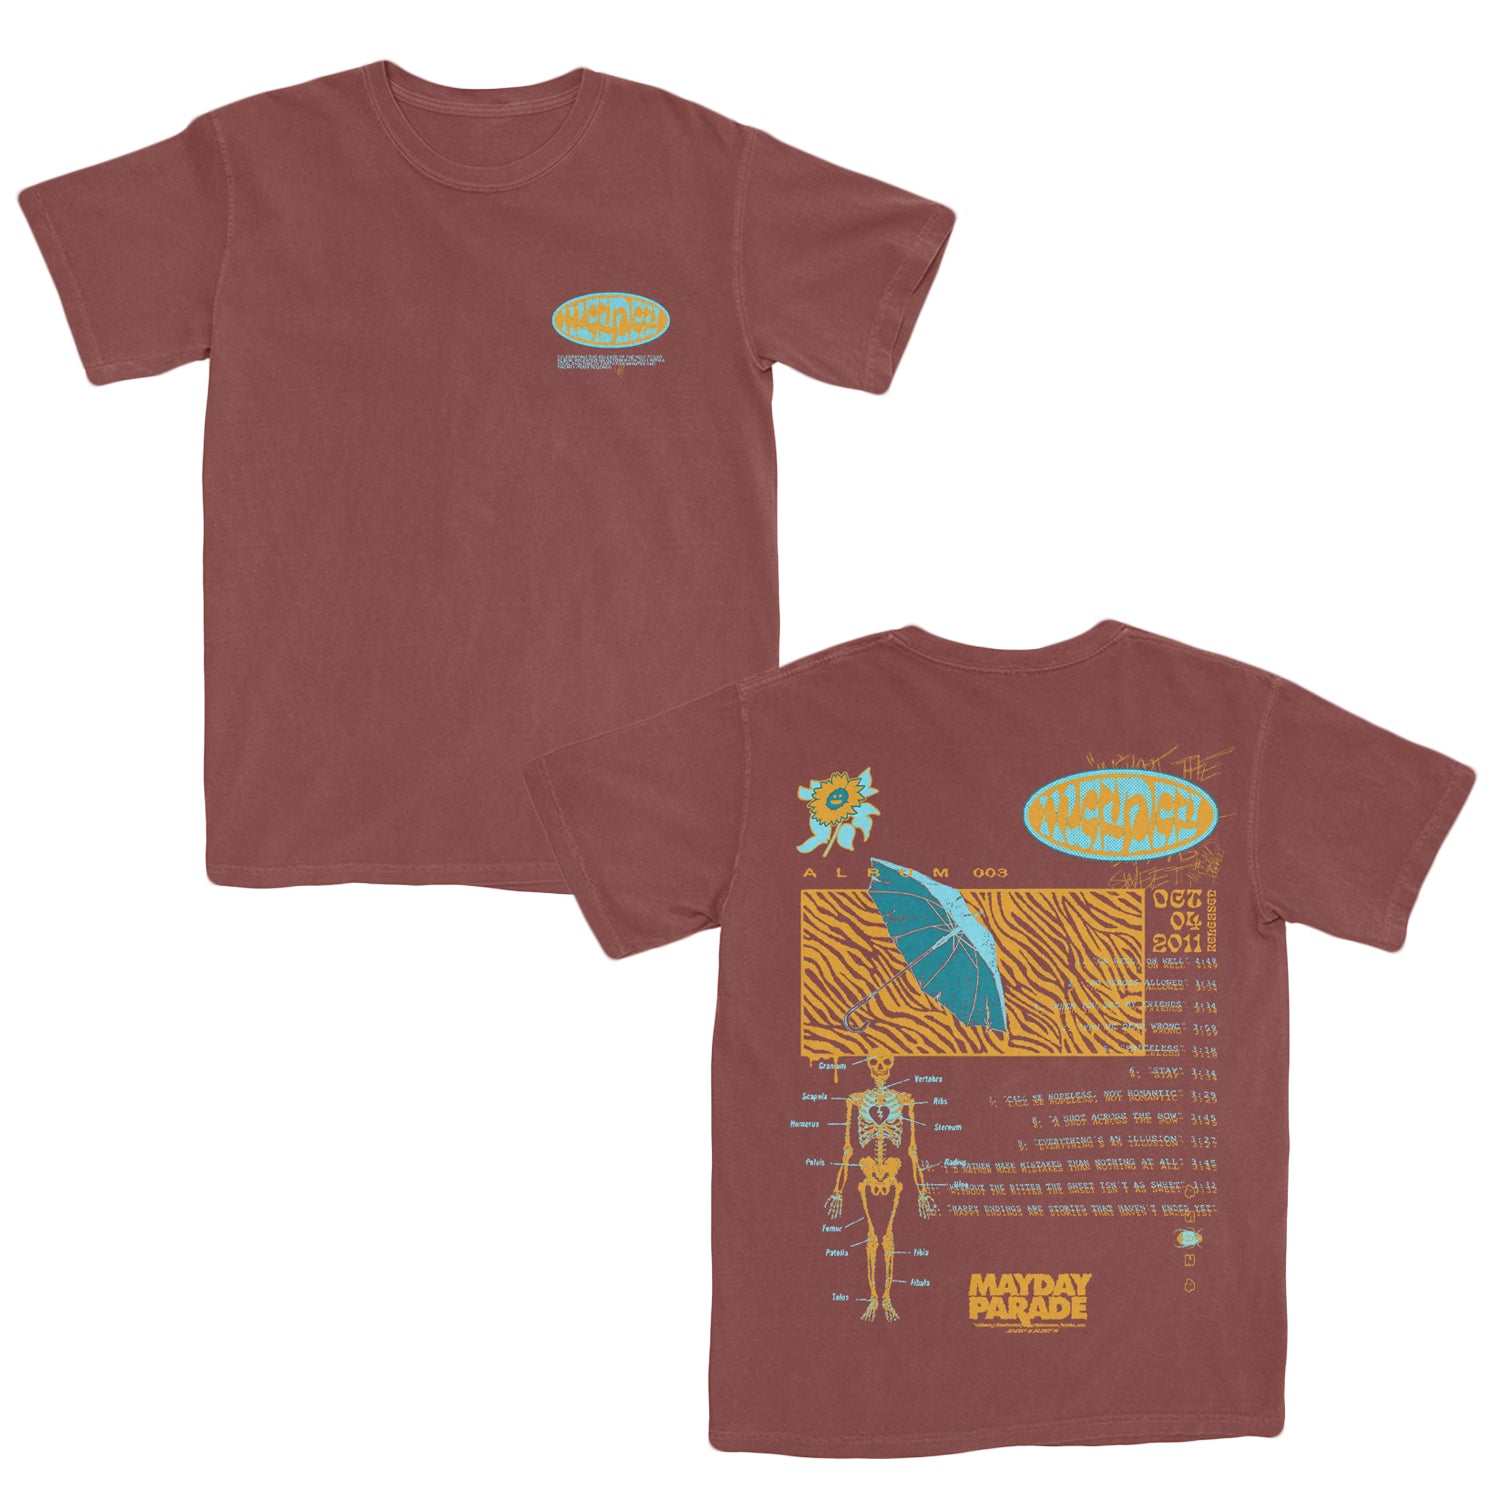 image of the front and back of a red tee shirt on a white background. front of the tee is on the left and has a small print on the right chest that says mayday in a yellow and blue oval. the back of the tee is on the right and has a full back print in yellow and blue of a skeleton with an umbrella, and the tracklist to mayday parade's debut self titled album